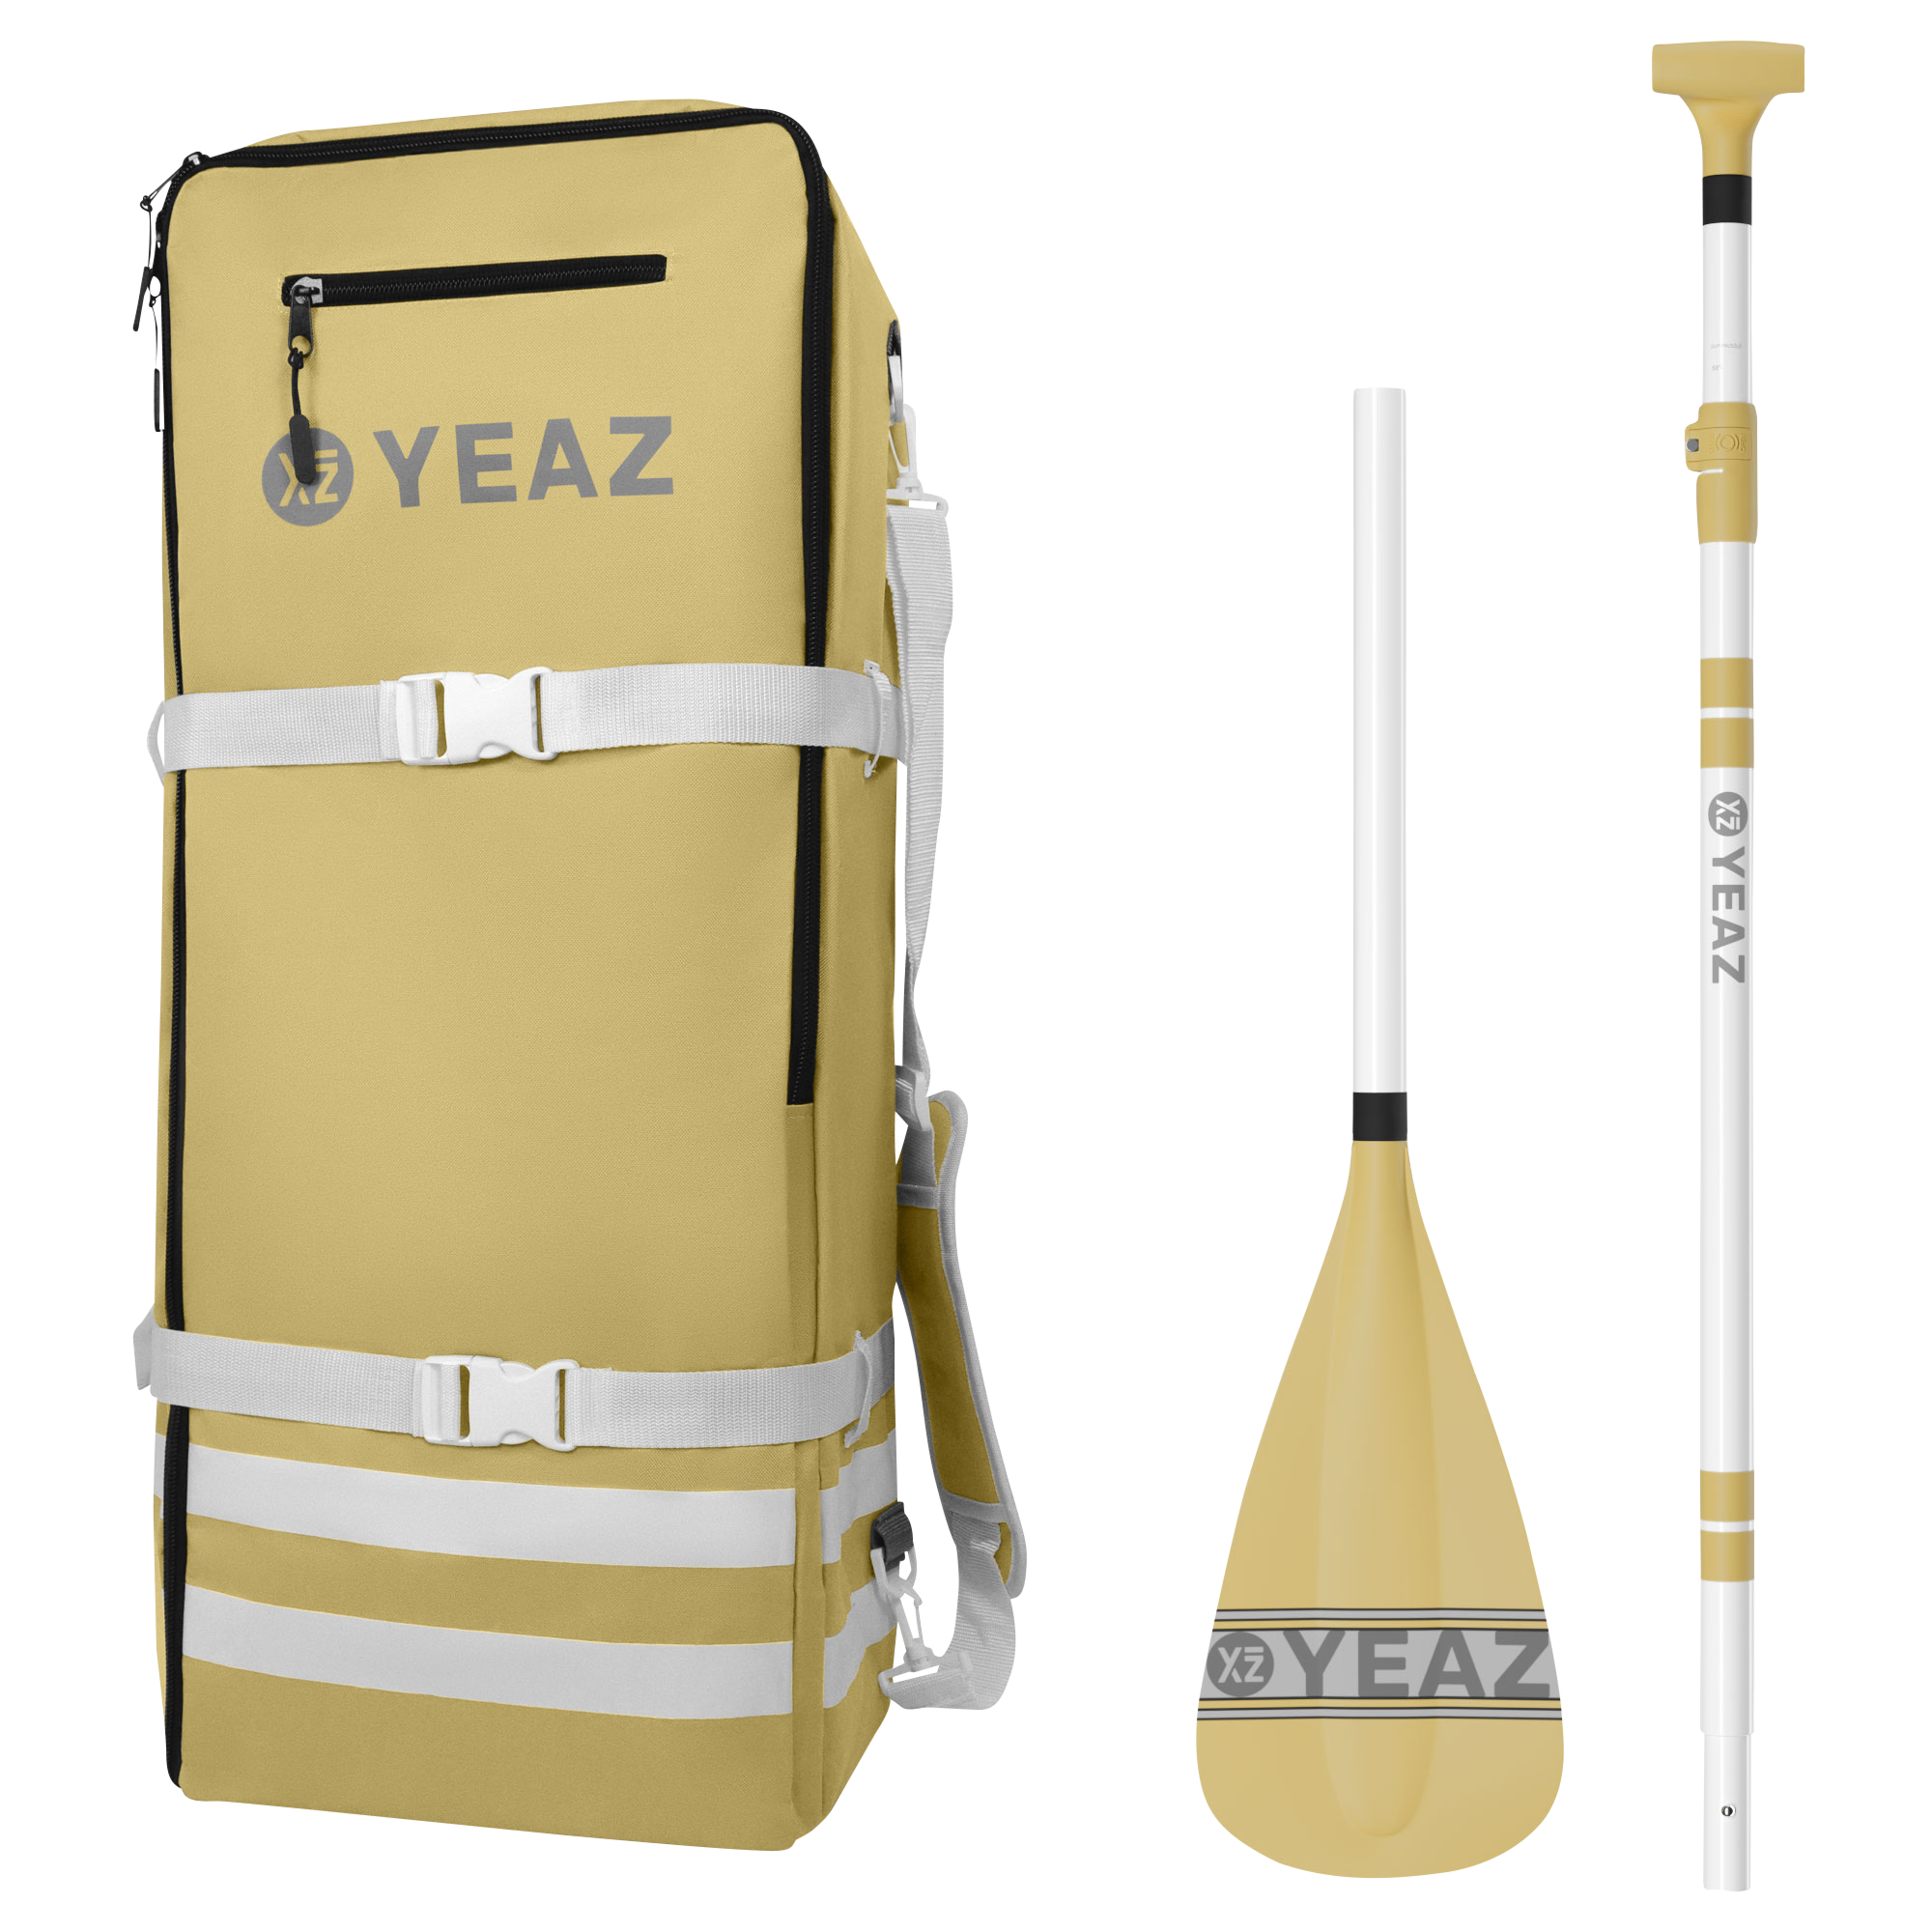 SUP YEAZ summer LE KIT CLUB Acessories,